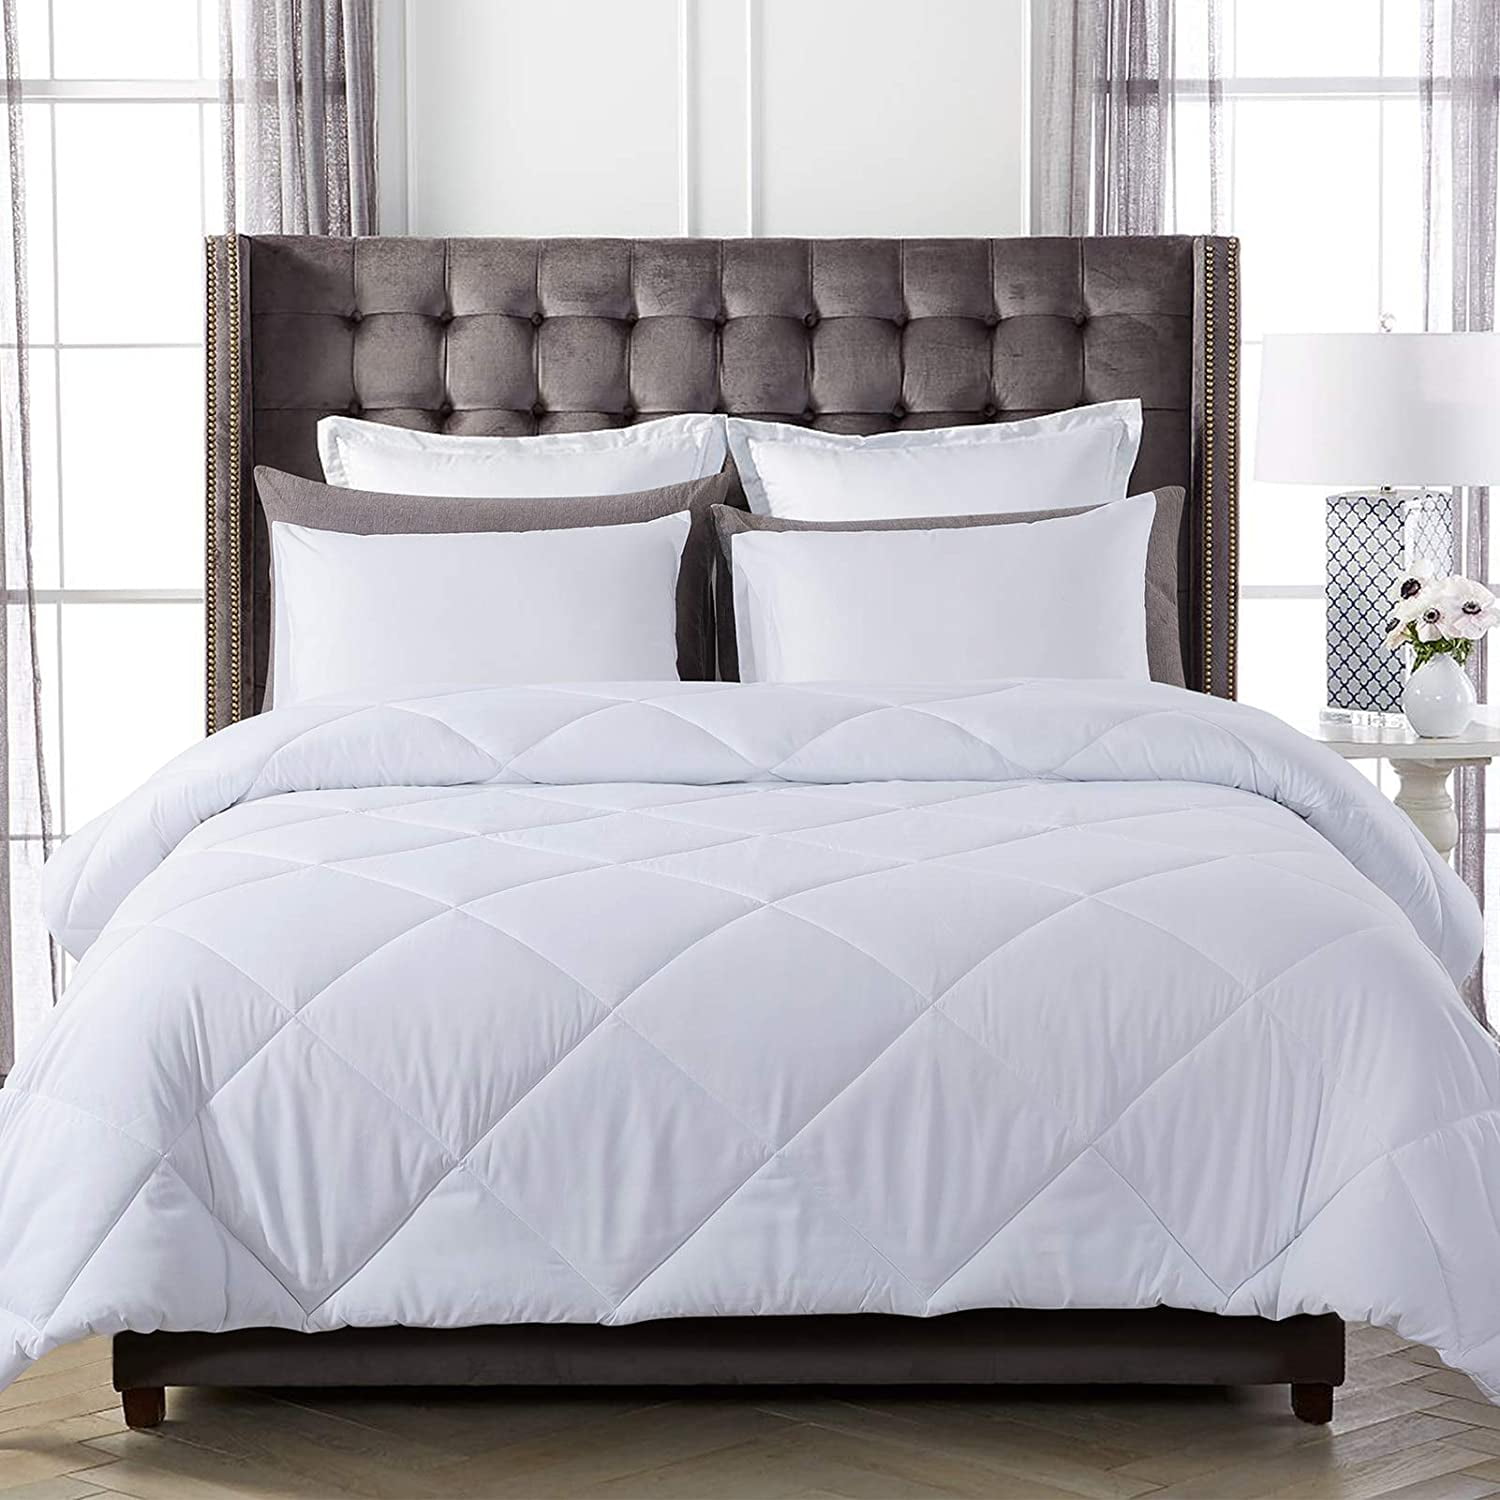 King Size Comforter All Season Lightweight Quilted Down Alternative Comforter 